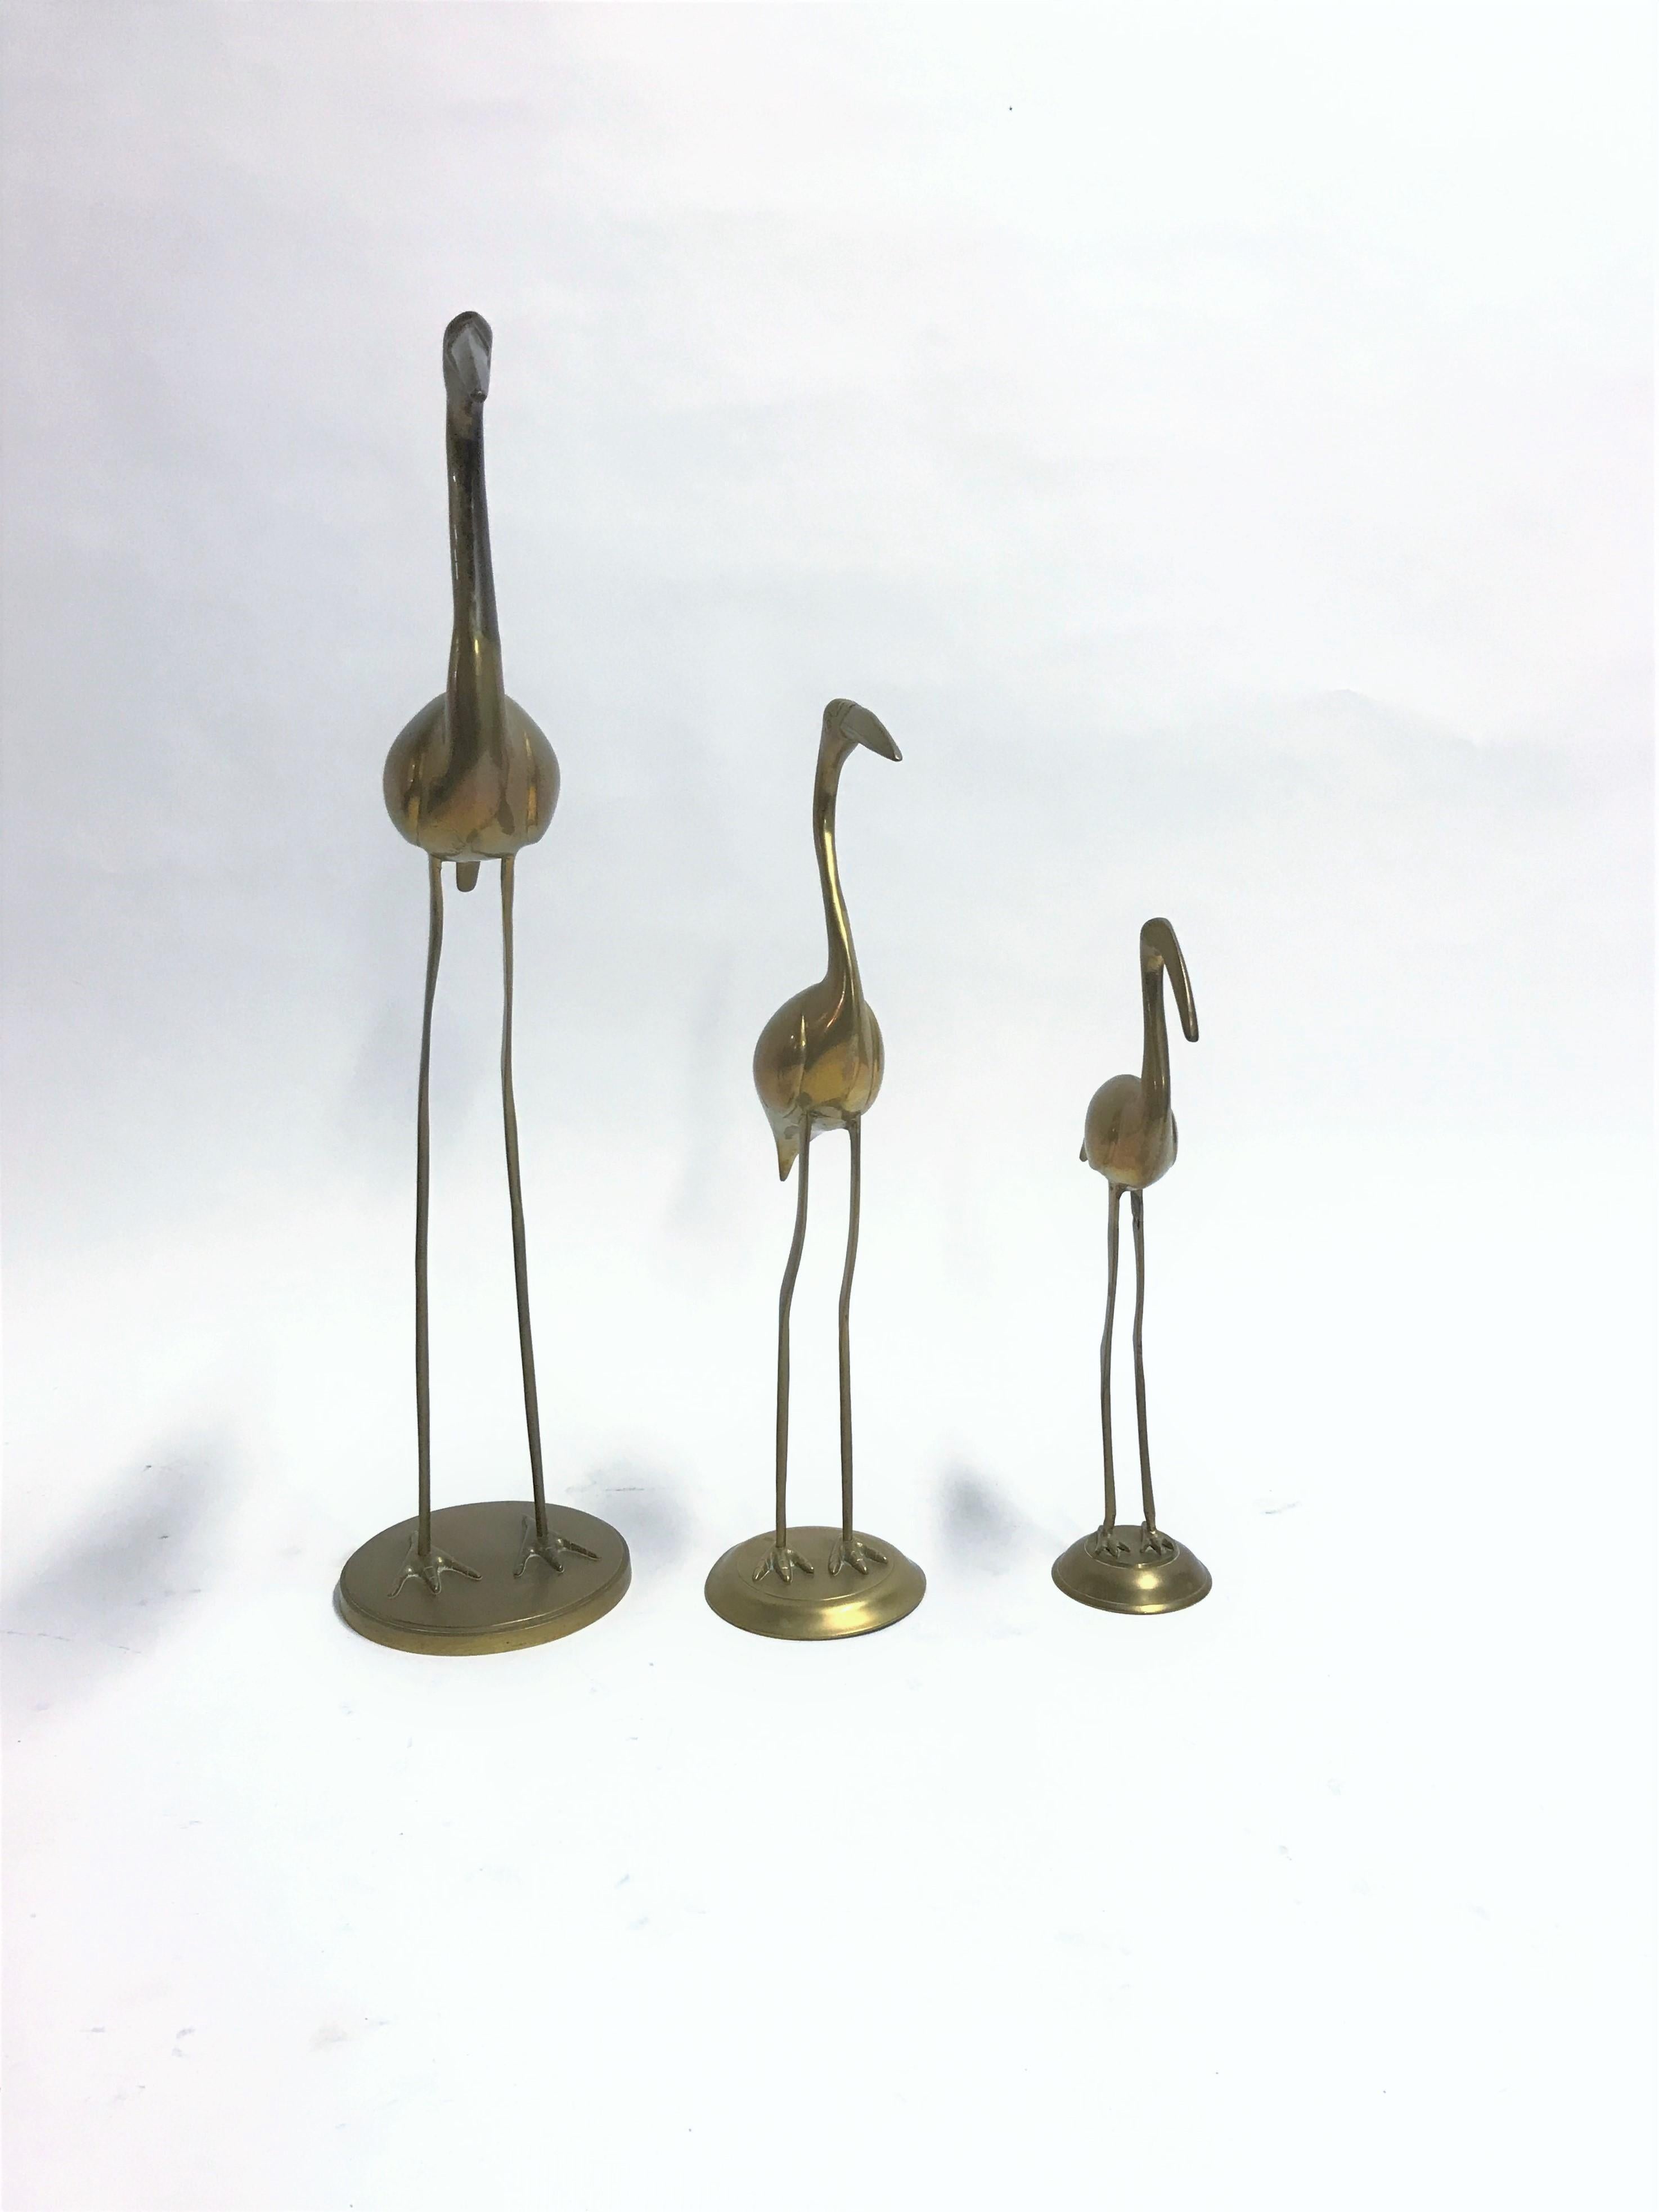 Lovely set of 3 variable height crane birds.

Very decorative set.

Sold and priced as a set.

Good original condition.

France, 1960s.

Measures: Height largest bird: 75cm/29.5